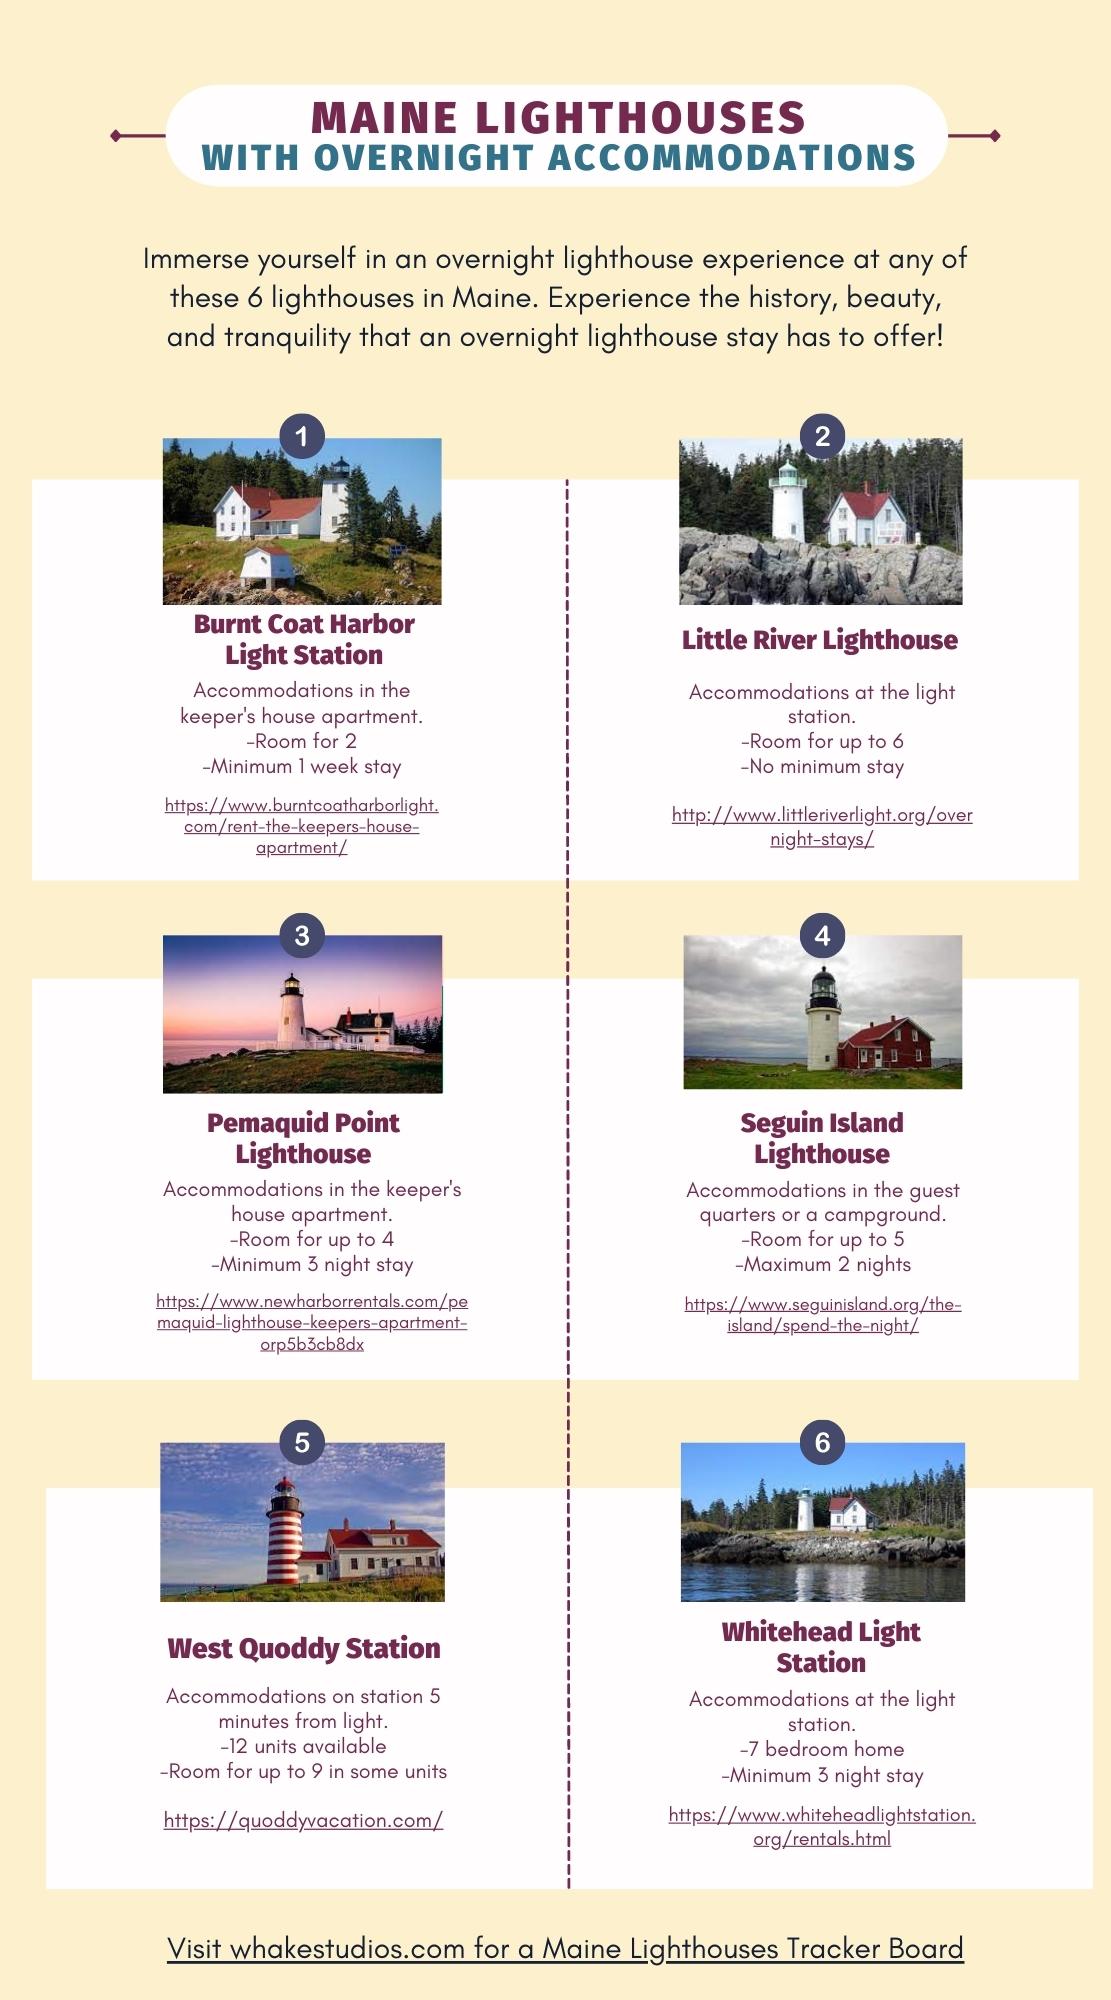 Lighthouses in Maine with overnight accommodations